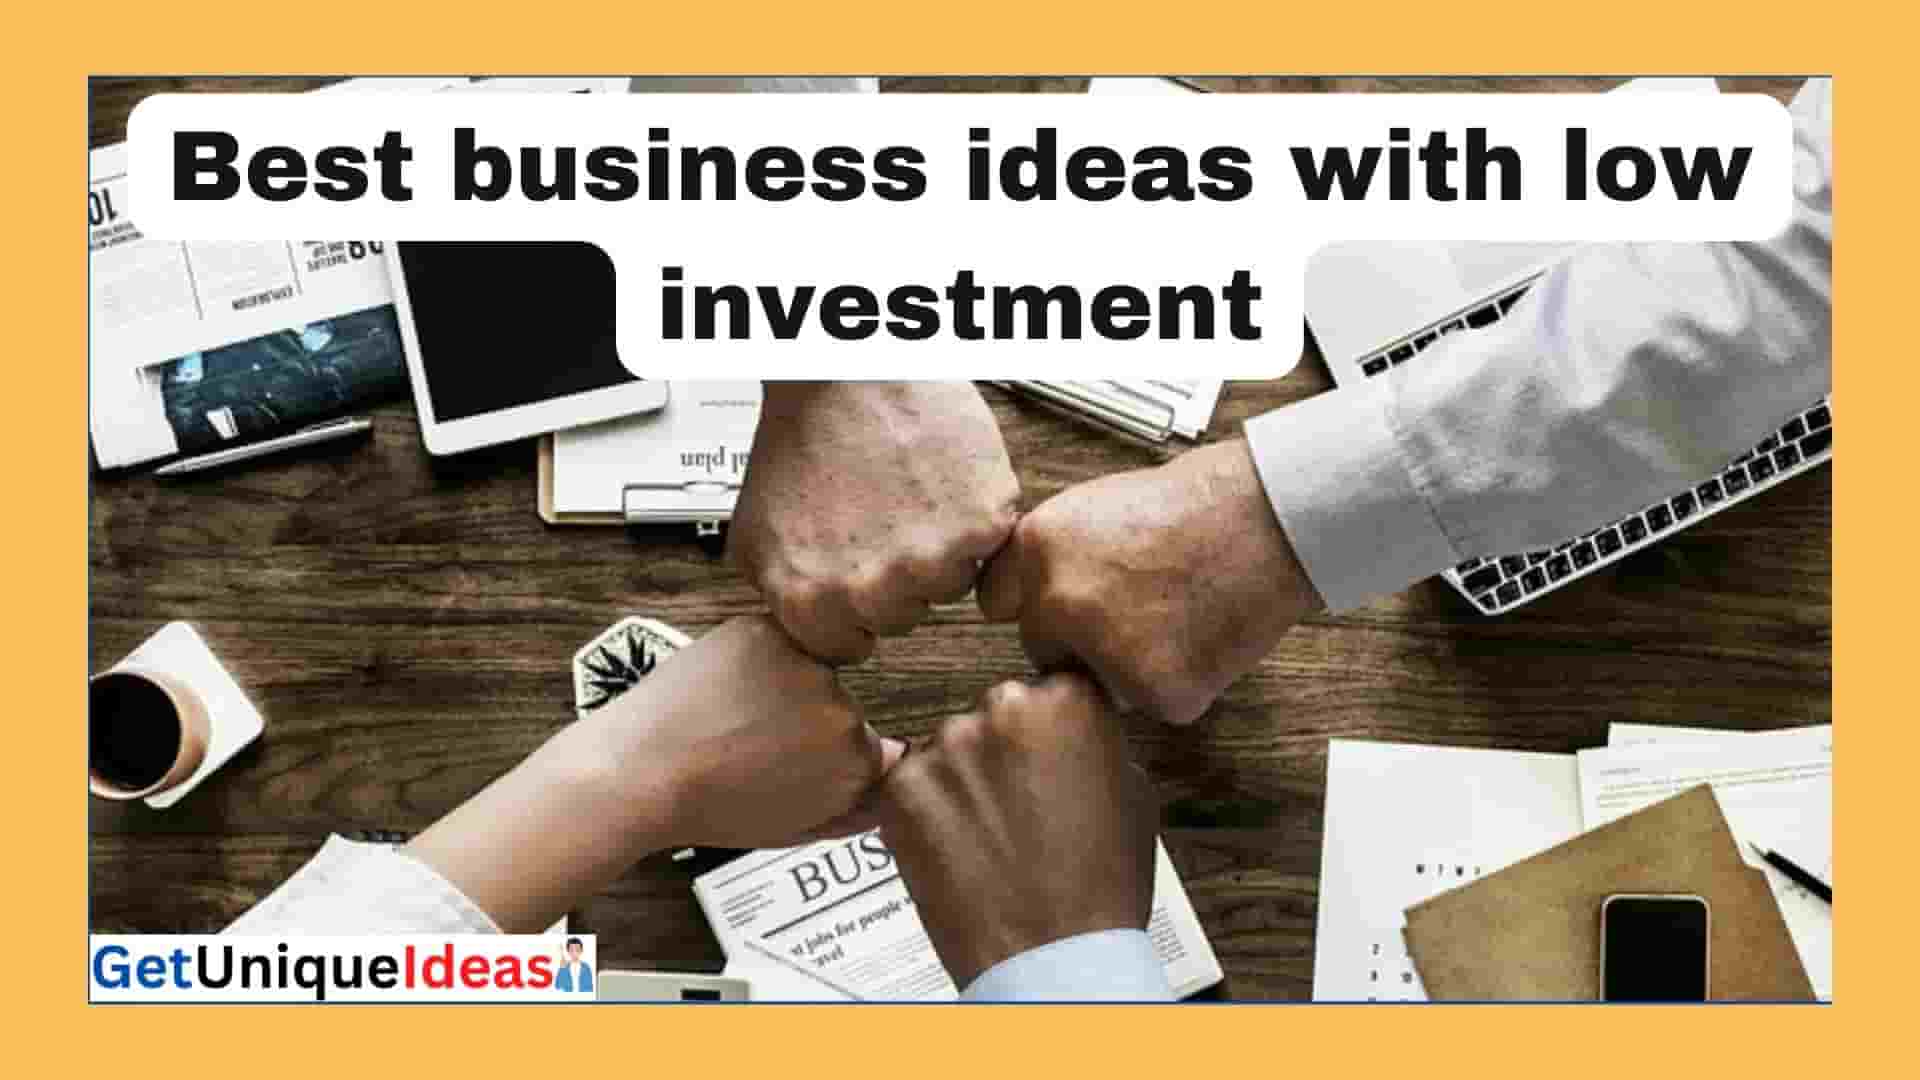 Best business ideas with low investment